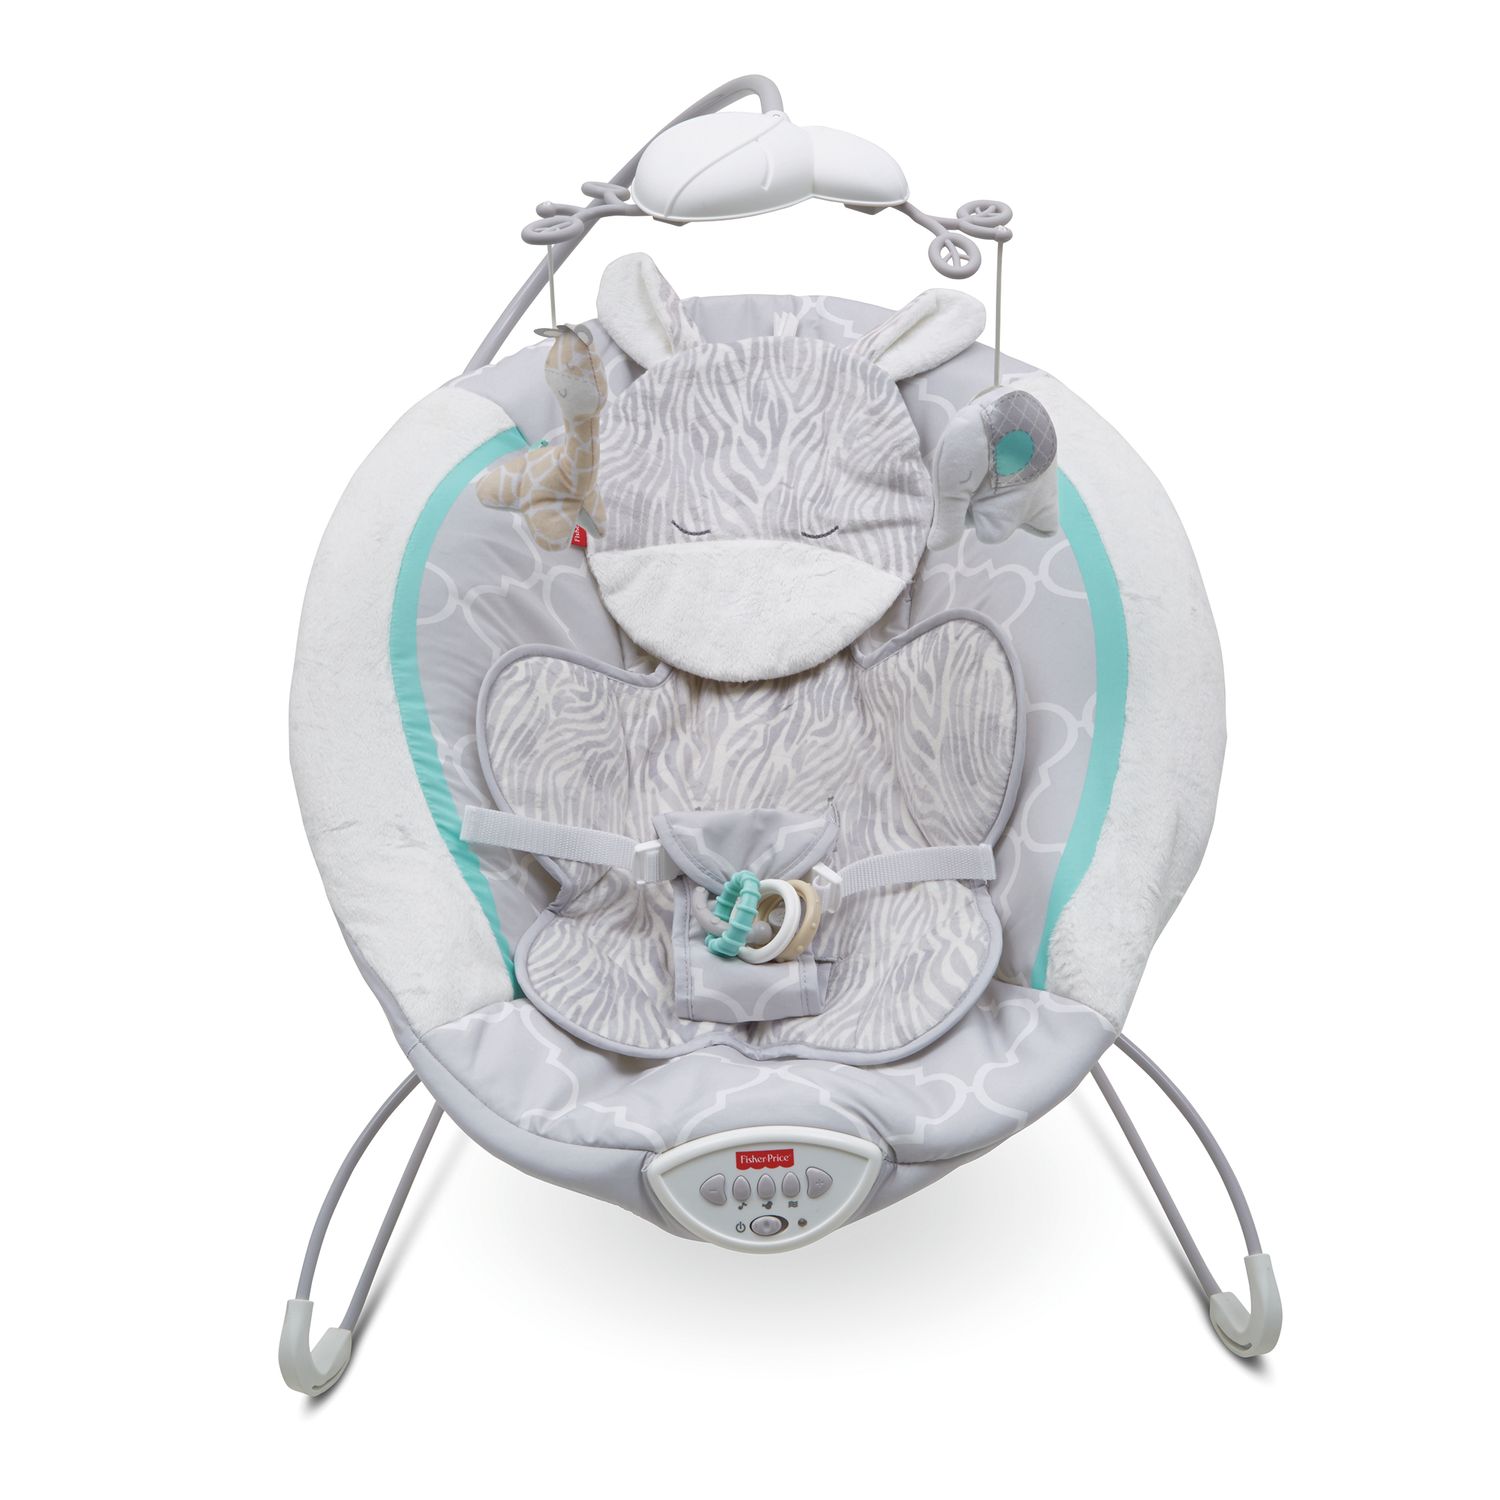 fisher price jungle baby bouncer